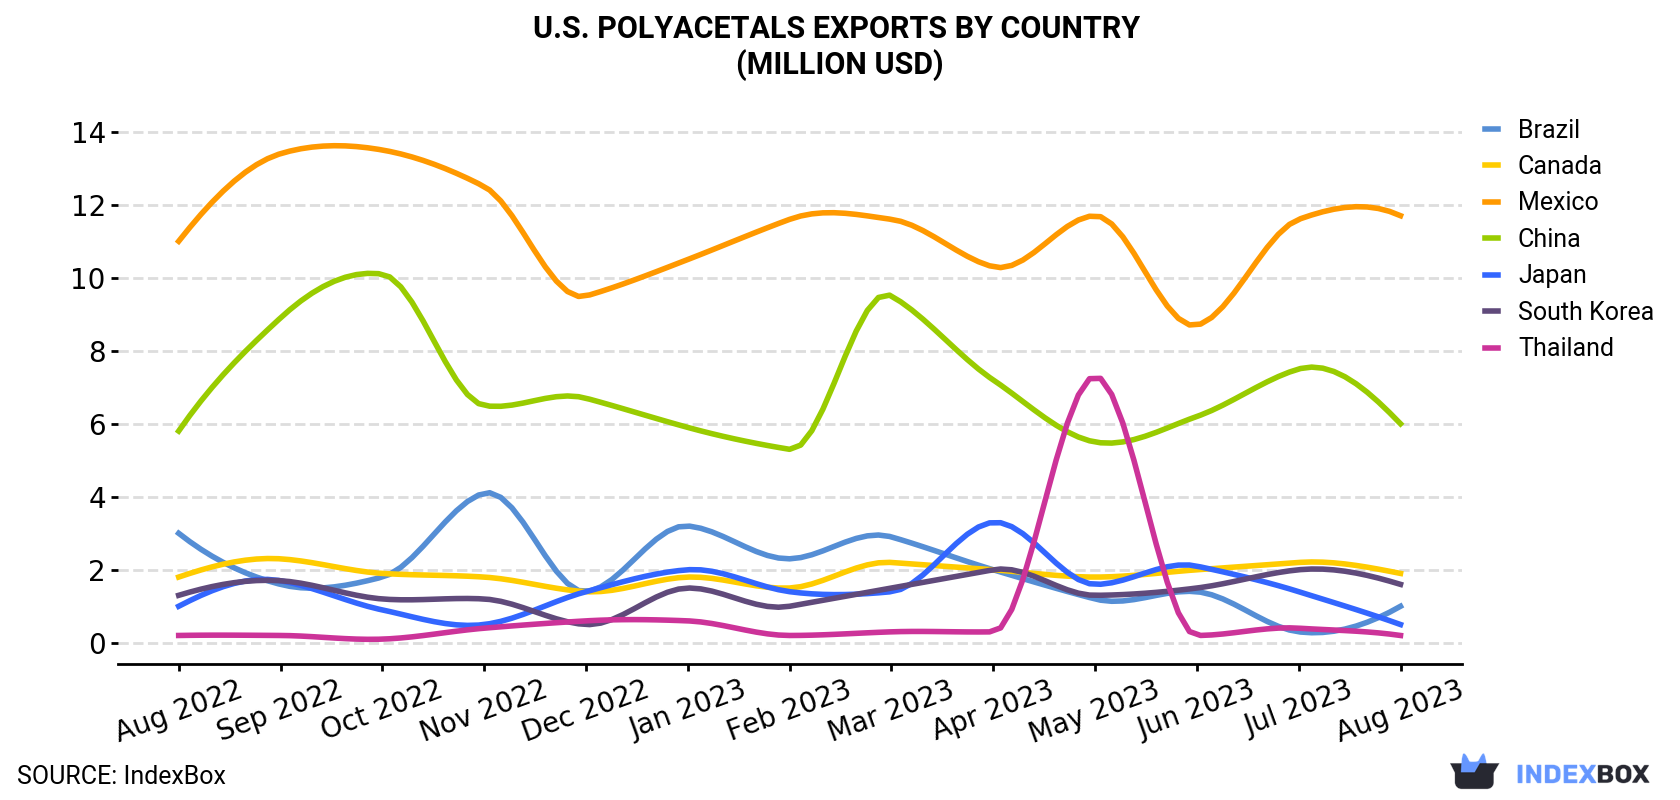 U.S. Polyacetals Exports By Country (Million USD)